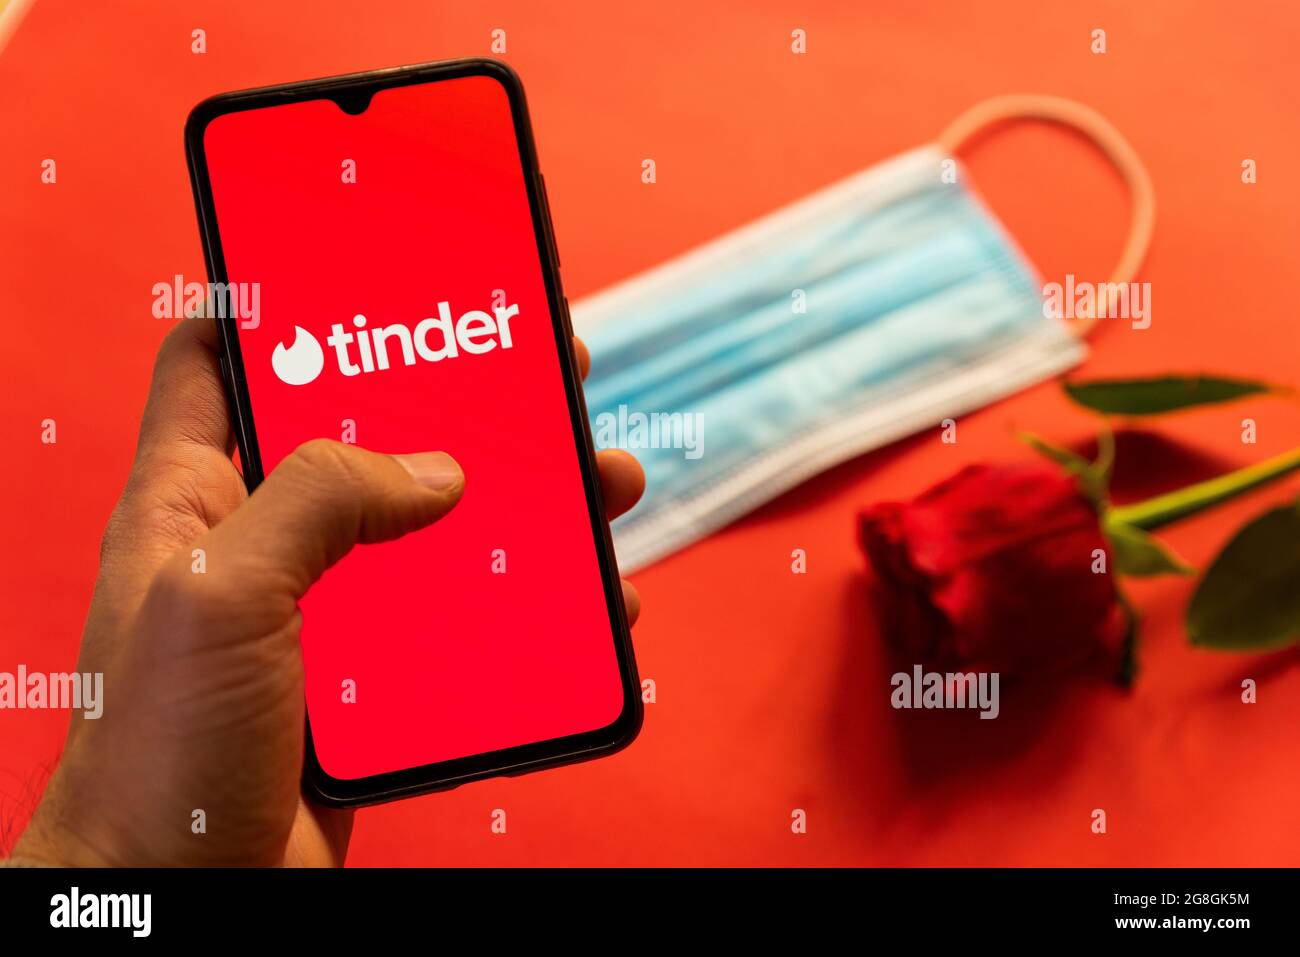 Tinder dating site in Barcelona